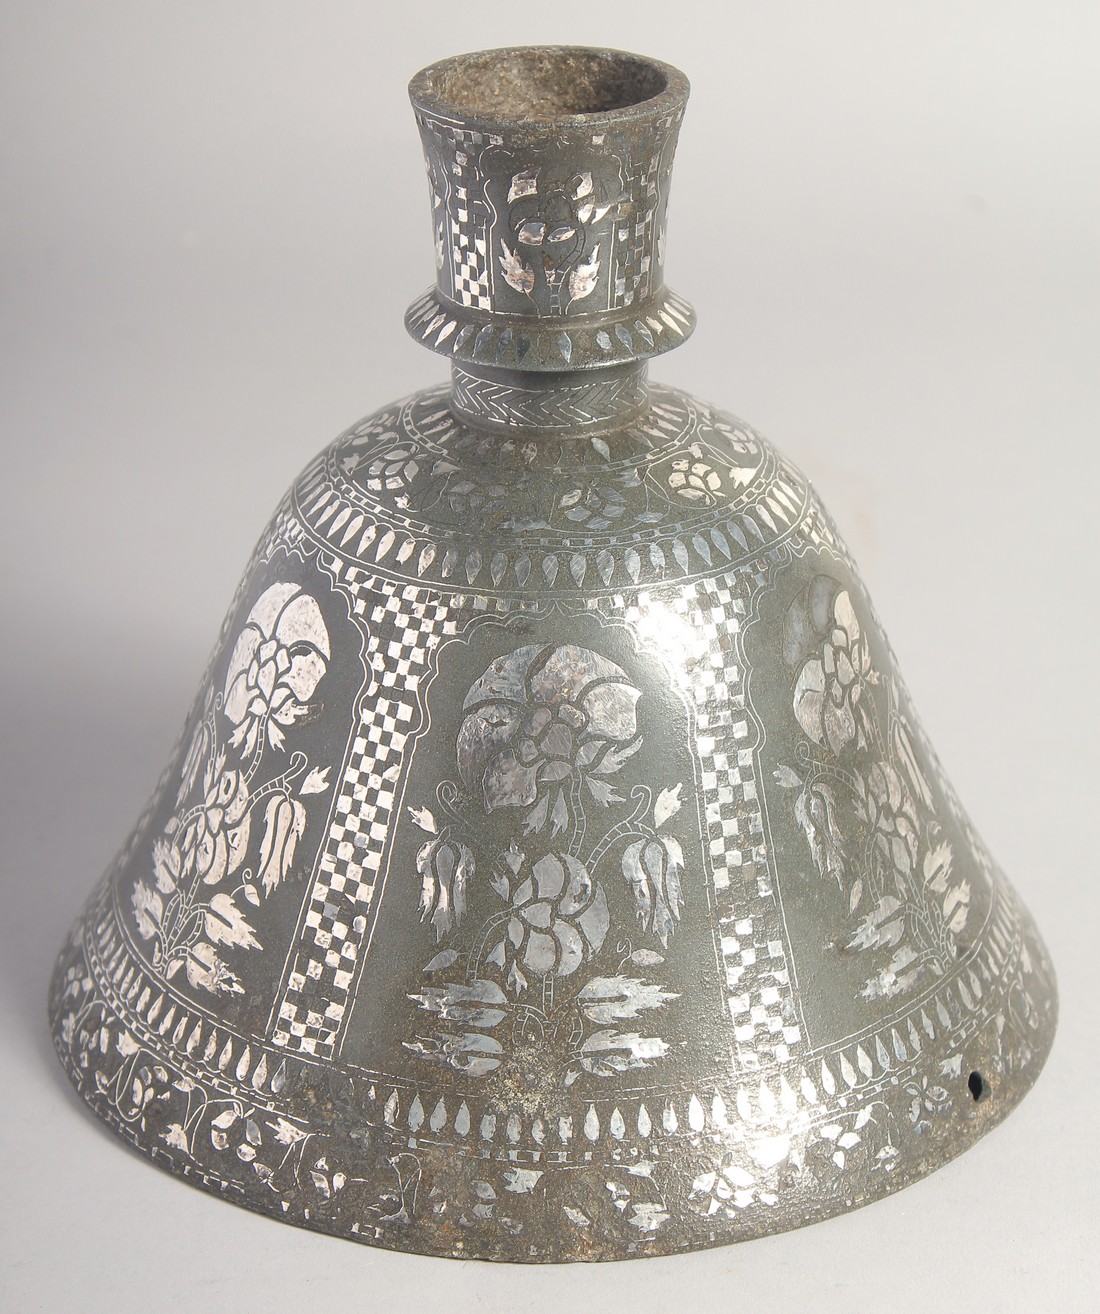 A LARGE 18TH CENTURY INDIAN BIDRI SILVER INLAID HUQQA BASE, with decorative floral panels. 20cm - Image 3 of 5